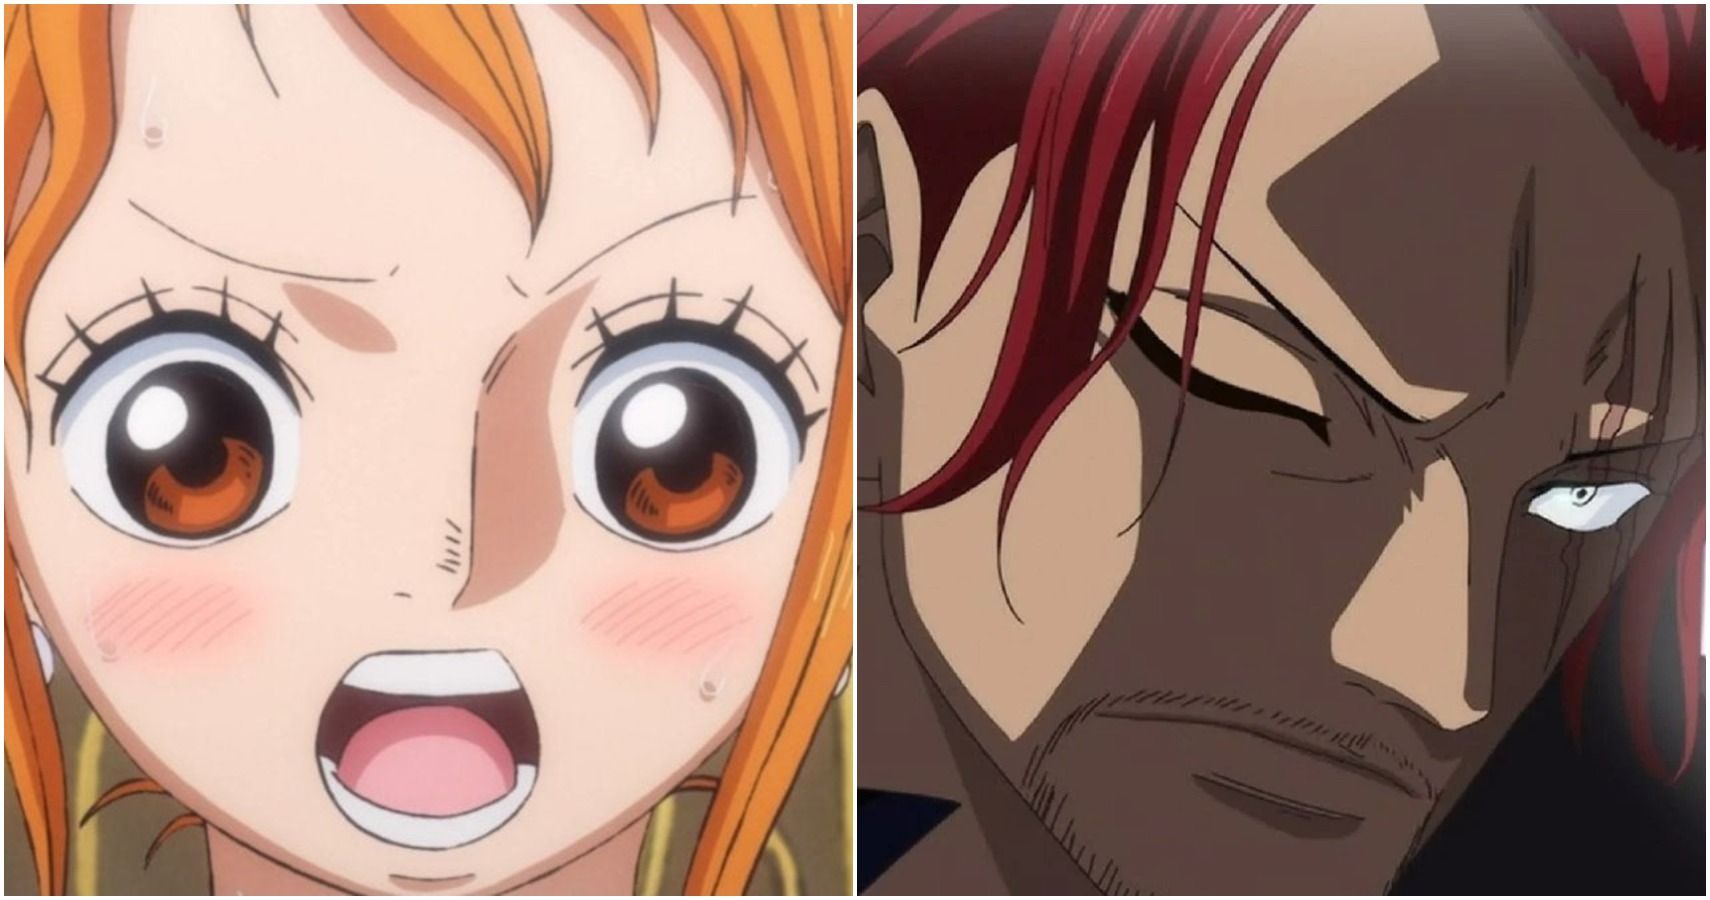 Split image: Nami and Shanks from One Piece